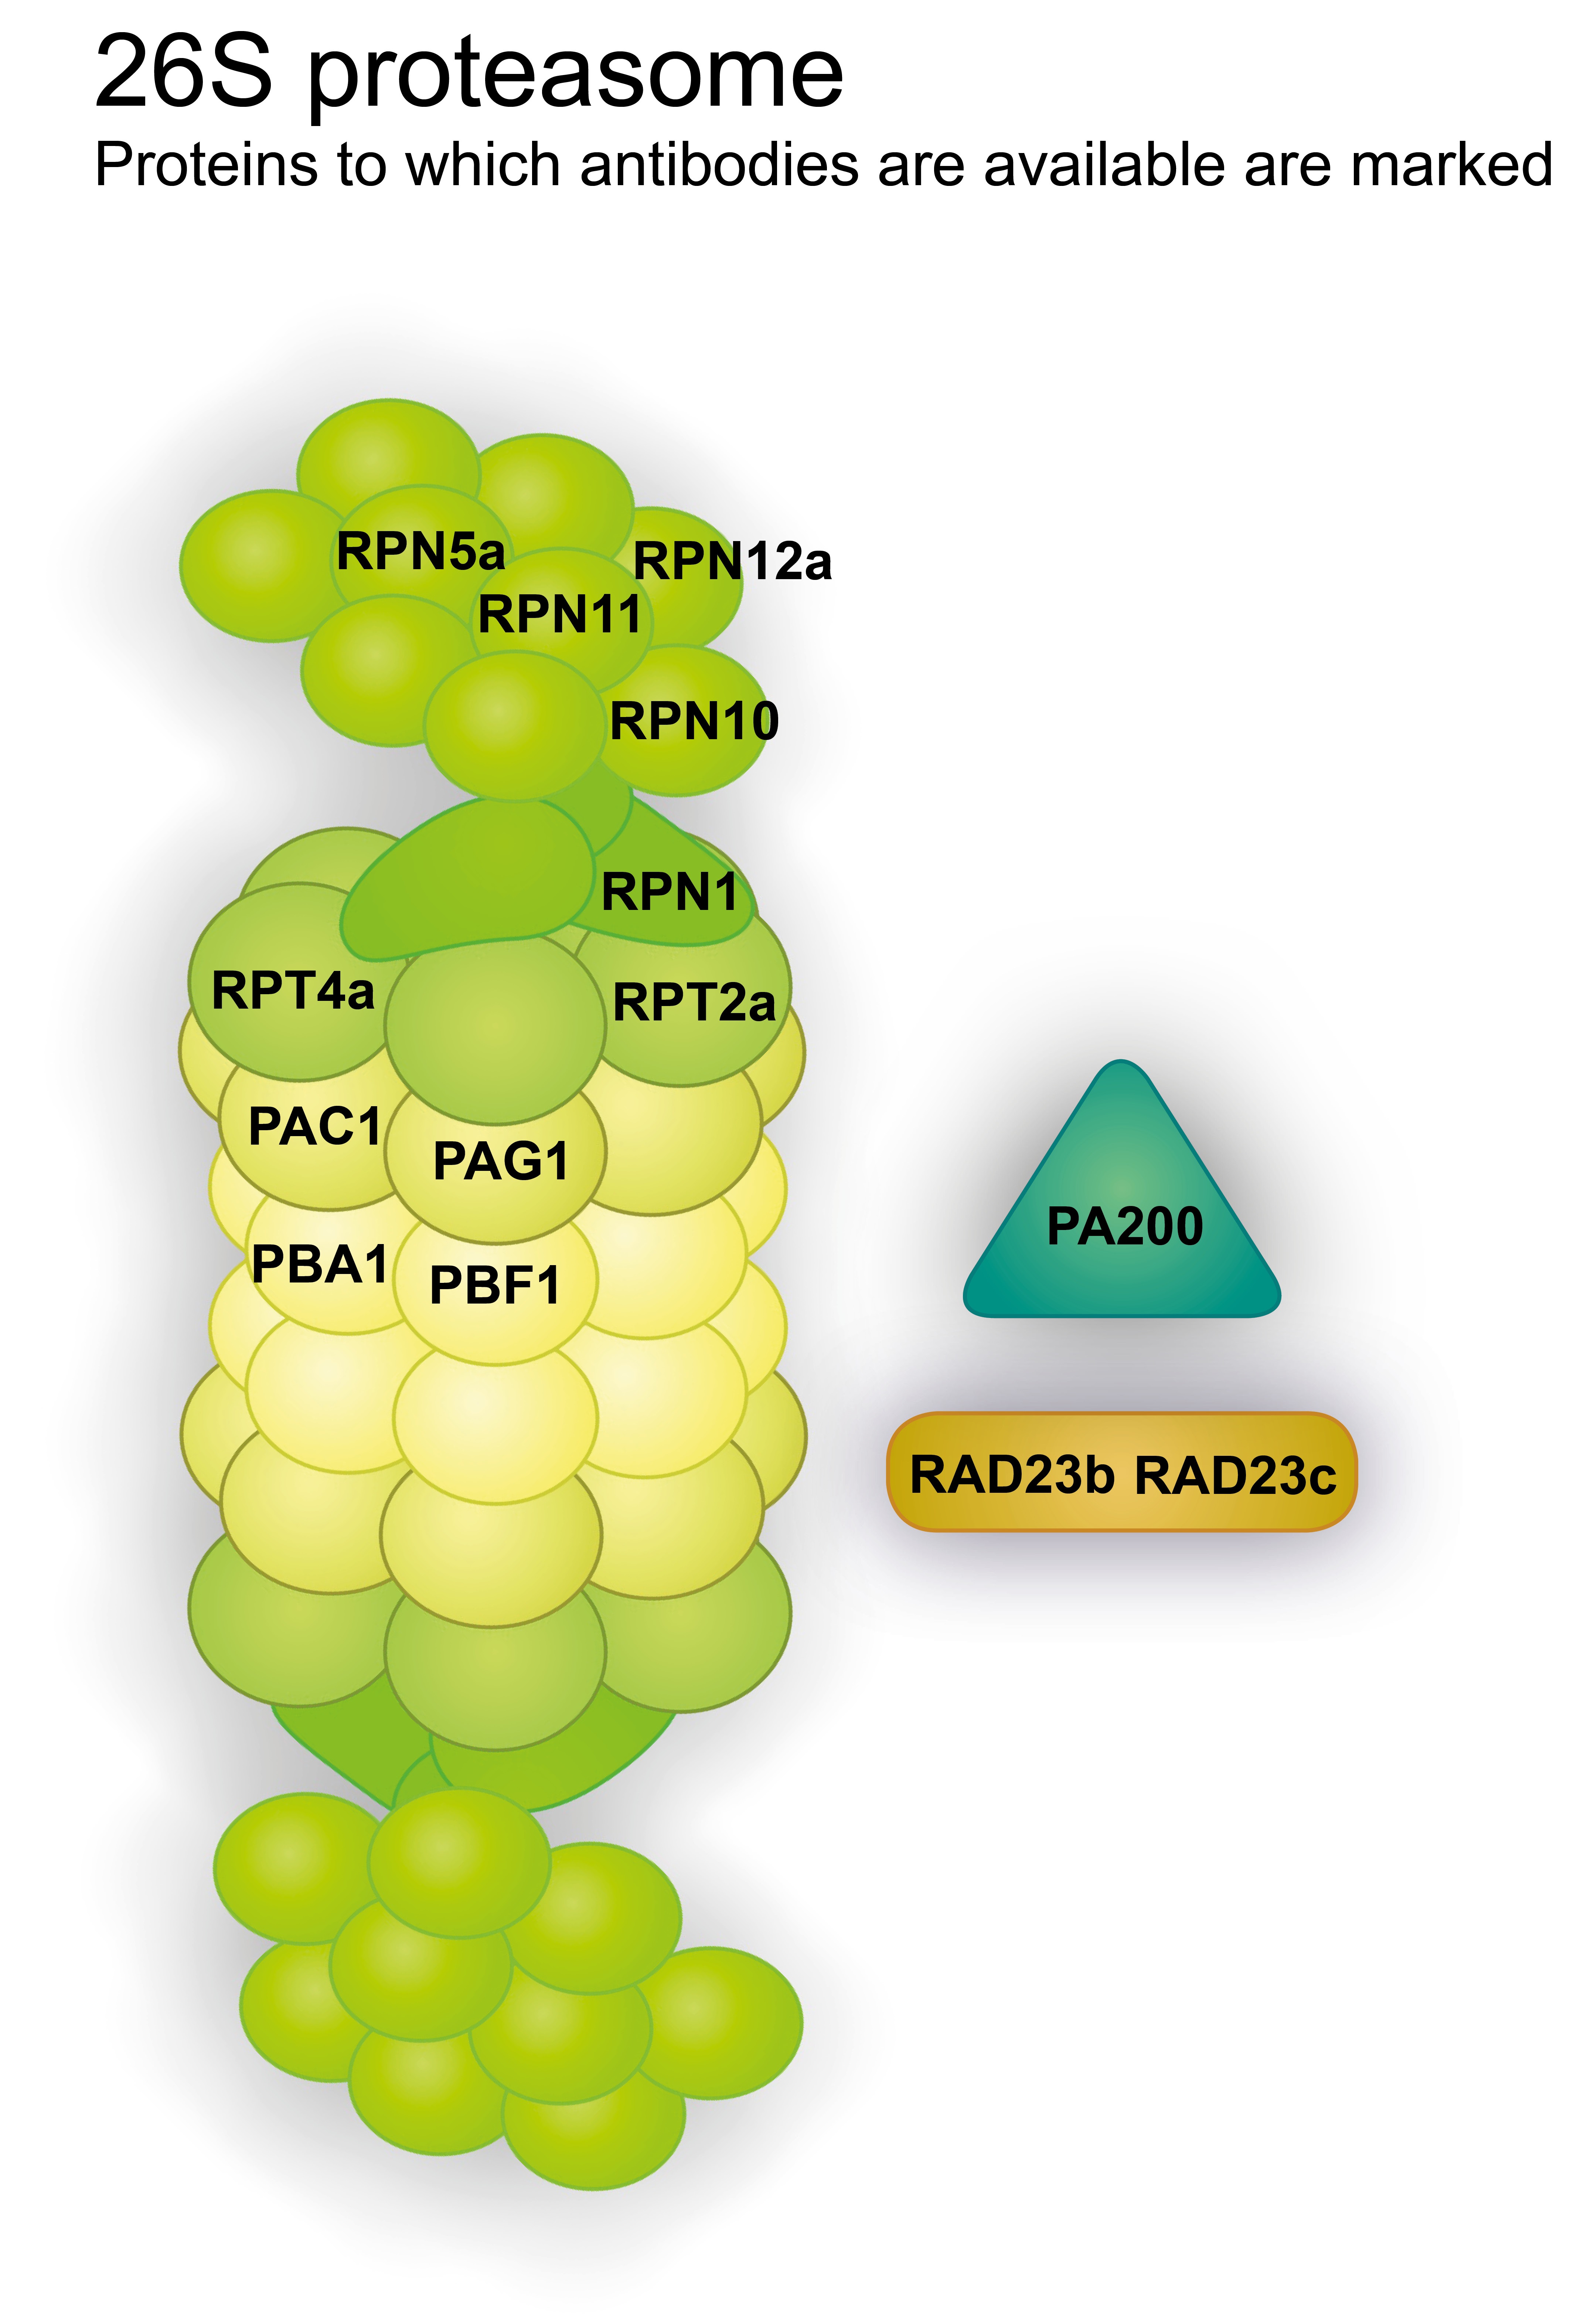 Illustration of 26S proteasome